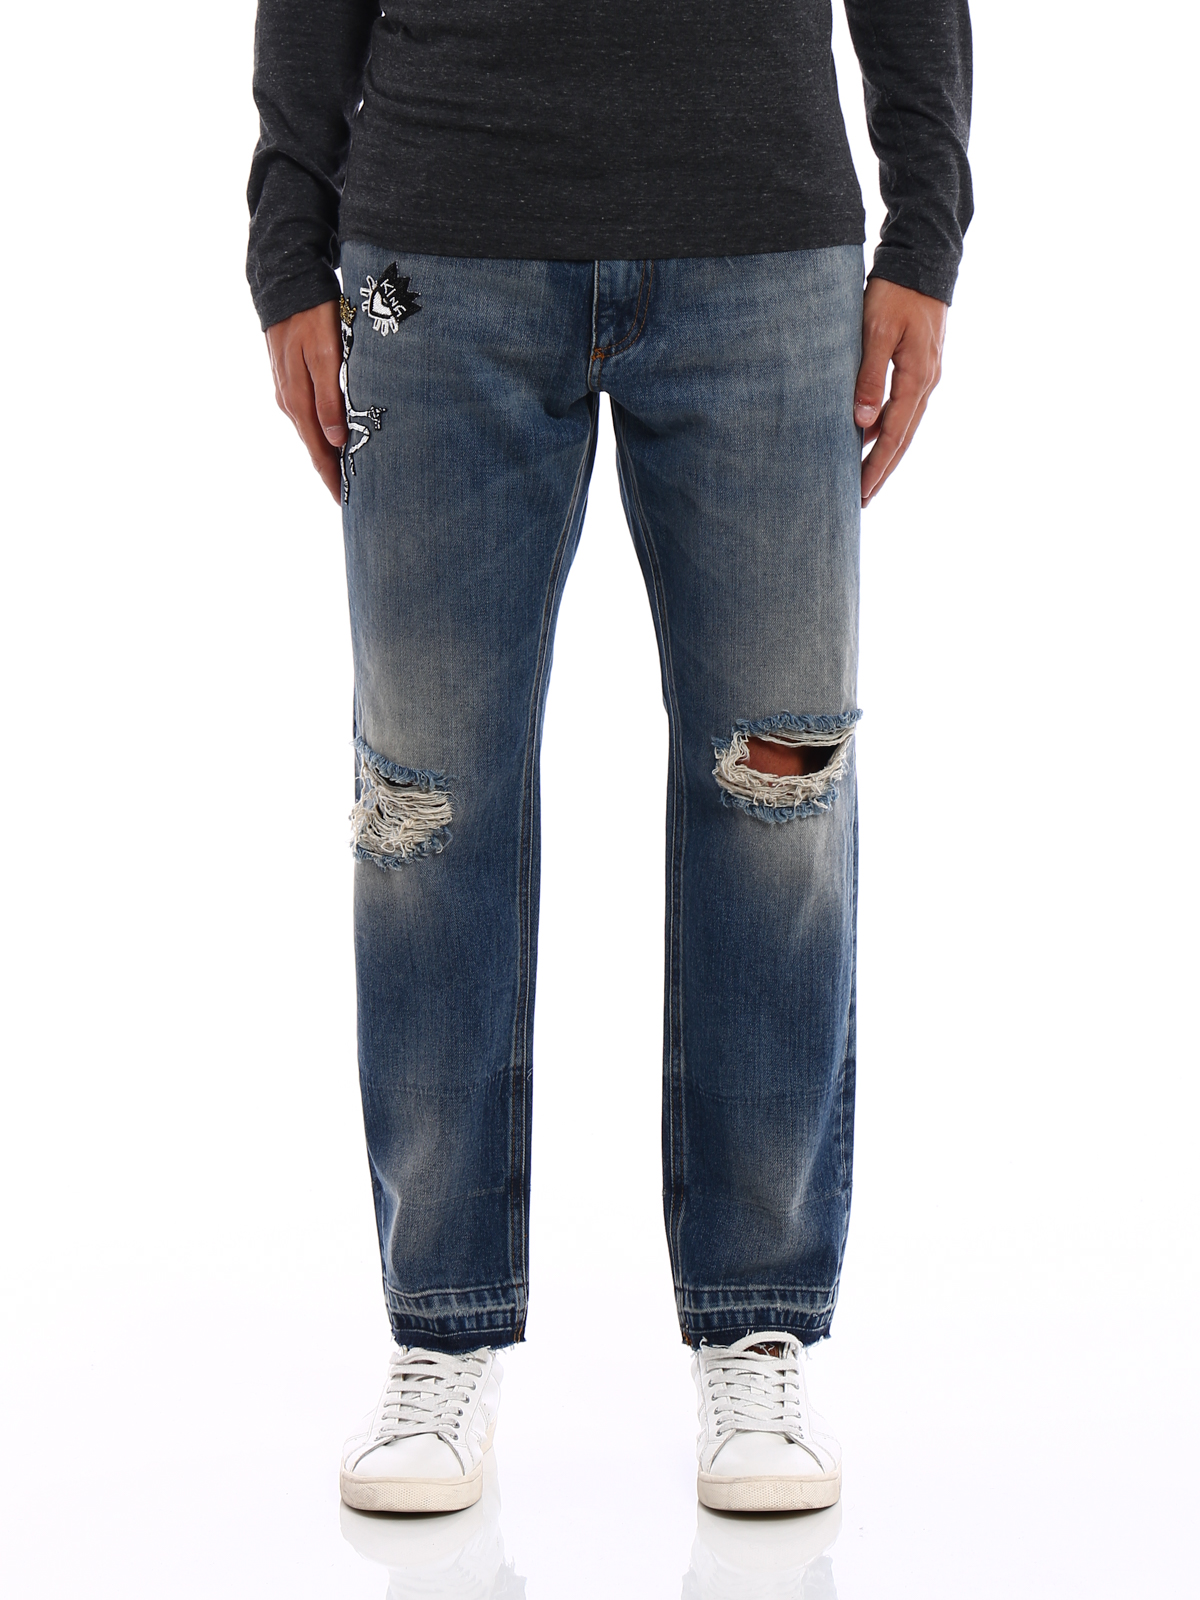 Straight leg jeans Dolce & Gabbana - Embroidered skull ripped jeans -  GY70CZG8V47S9001